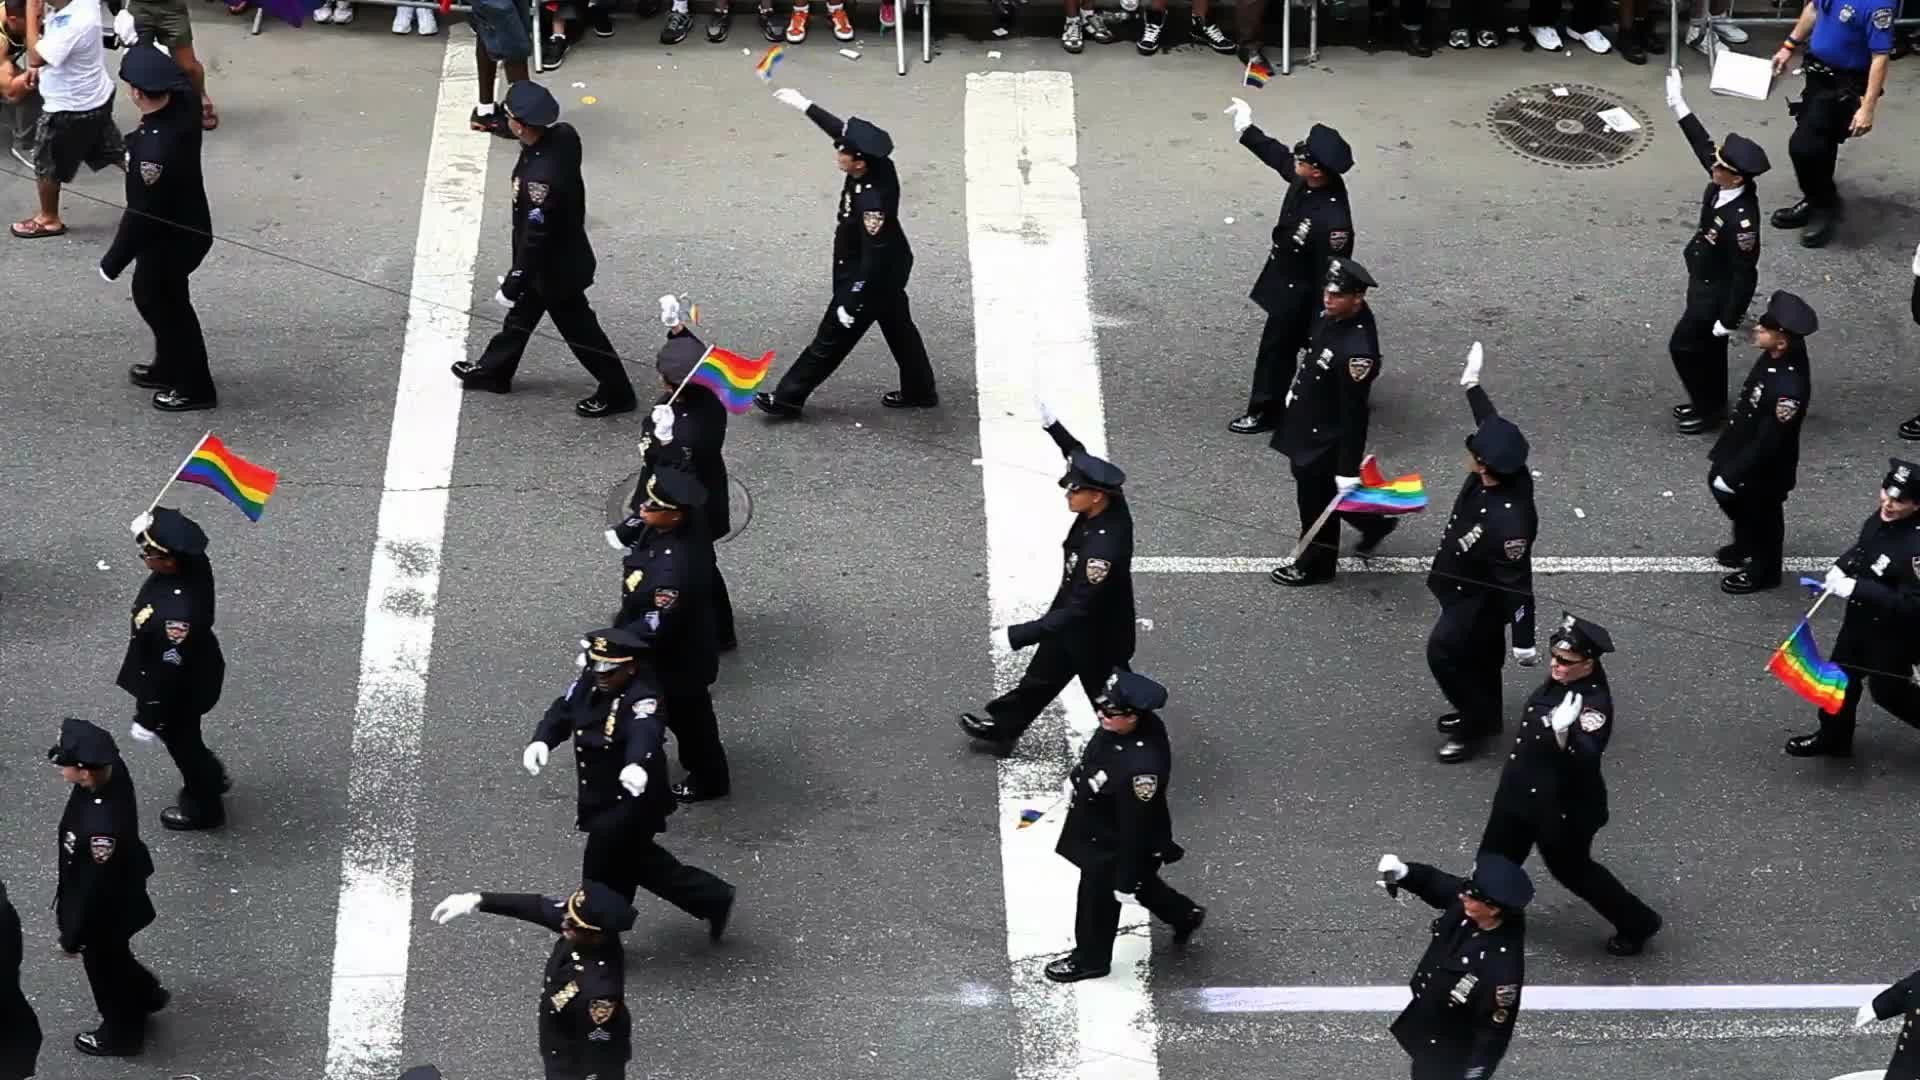 NYPD police officers marching in uniform at Gay Pride Parade in NYC